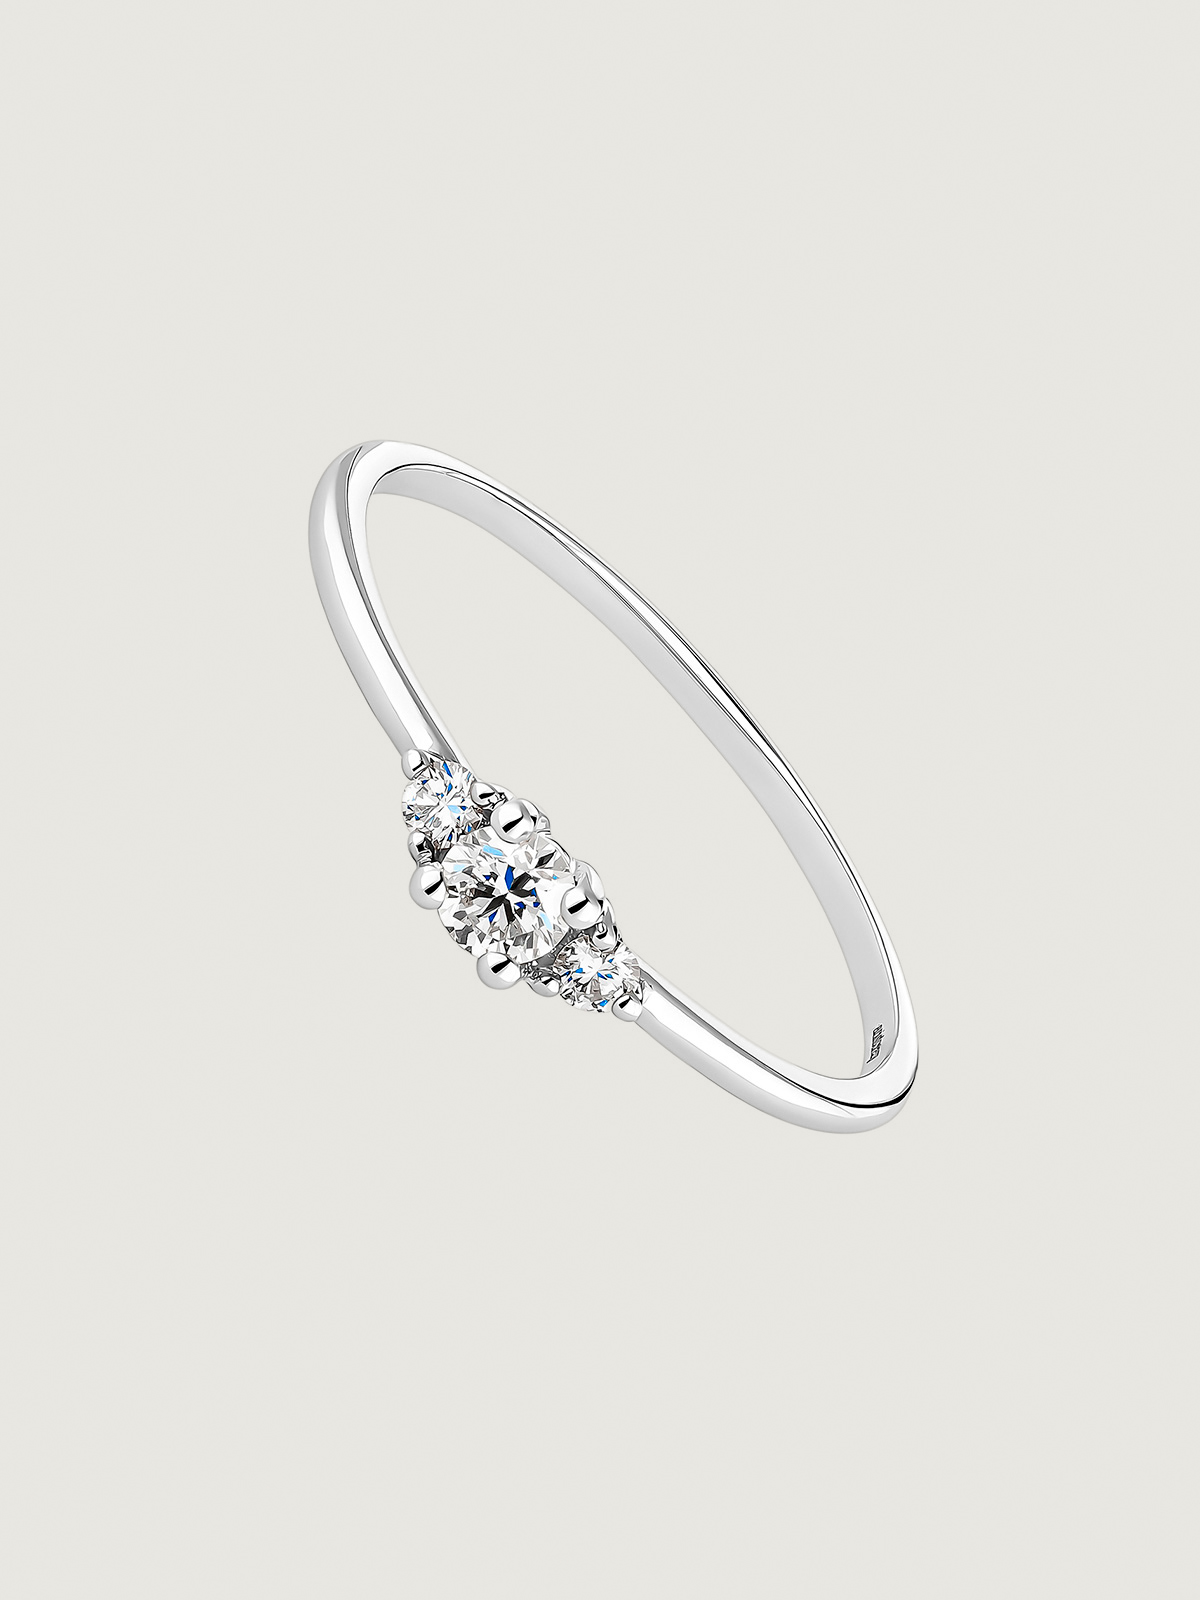 18K white gold trilogy ring with a central diamond of 0.10cts and diamonds